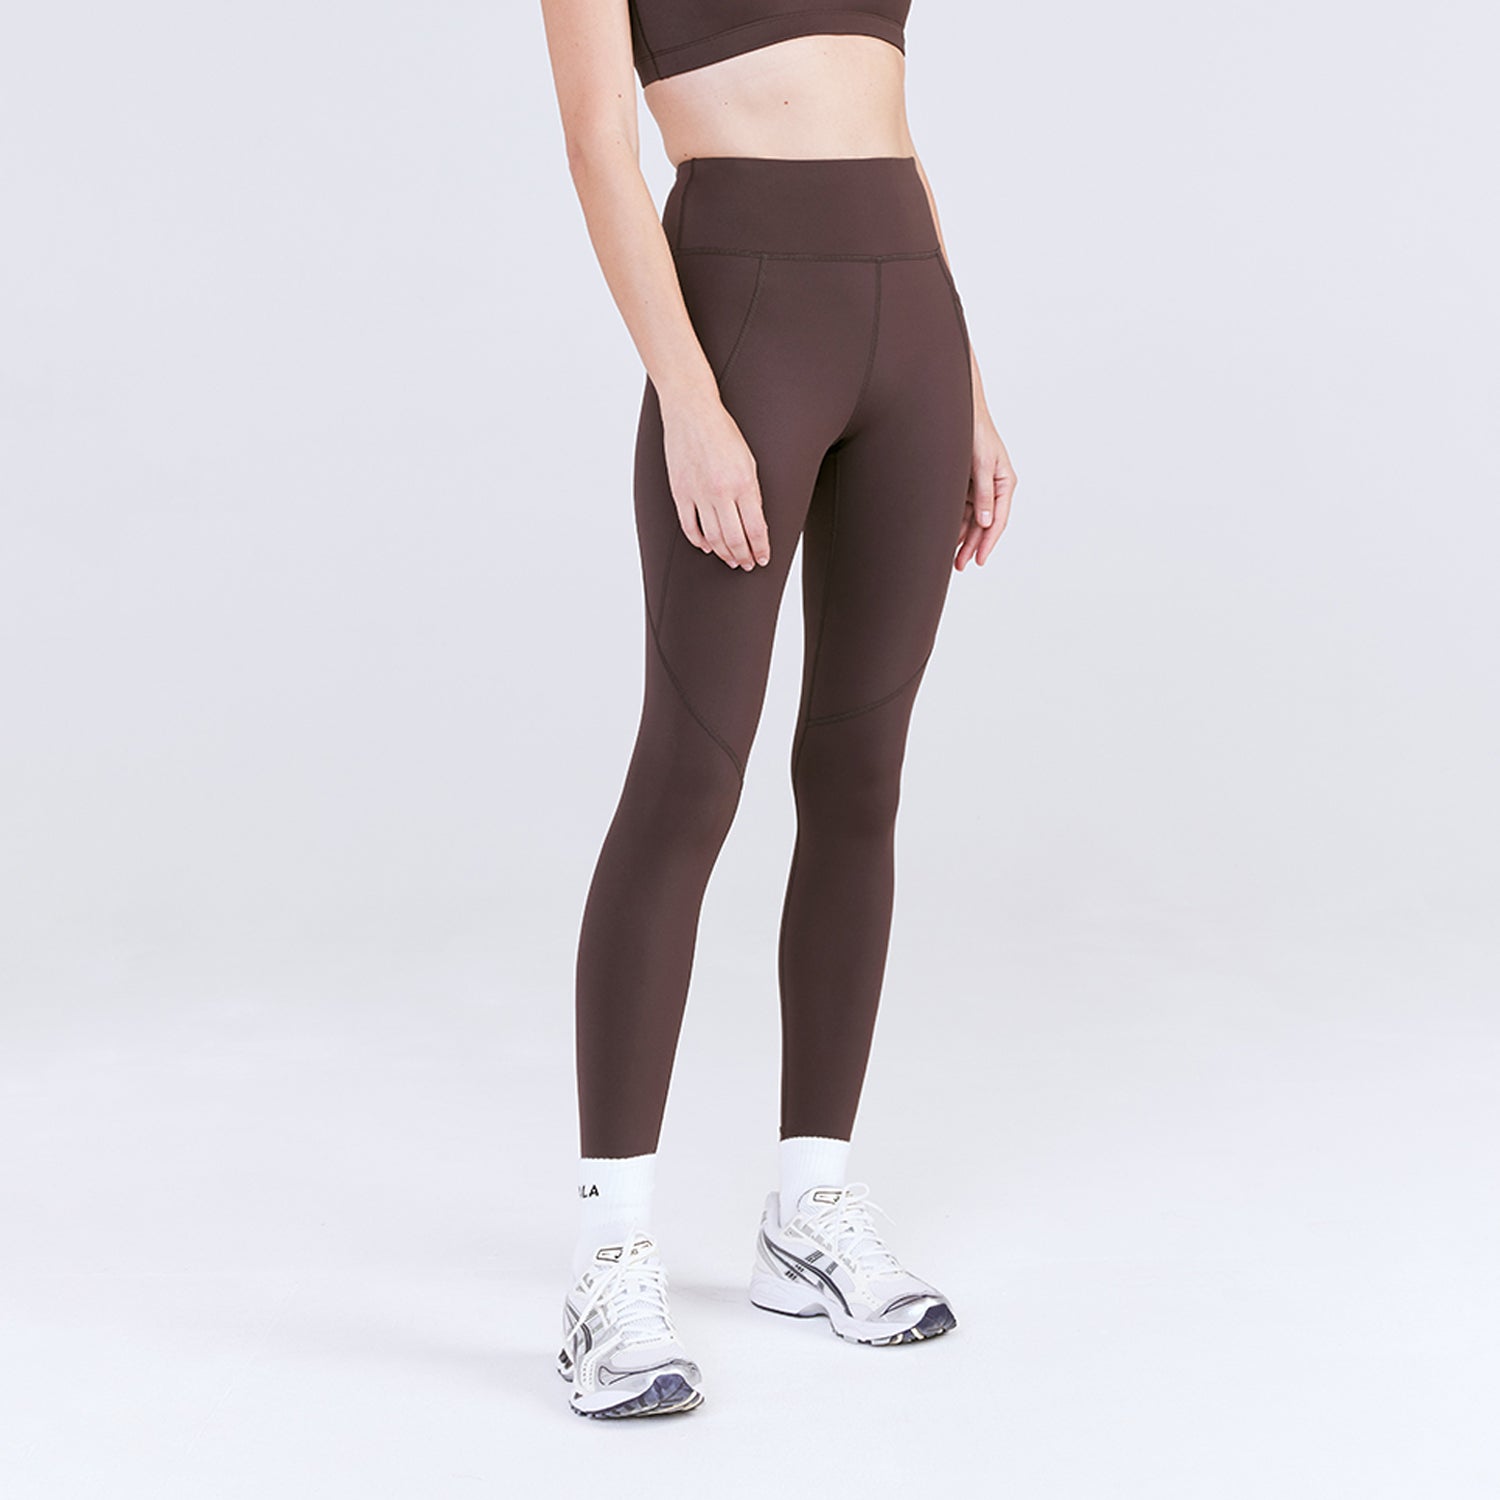 Love & Other things seamless high waisted leggings in chocolate brown | ASOS